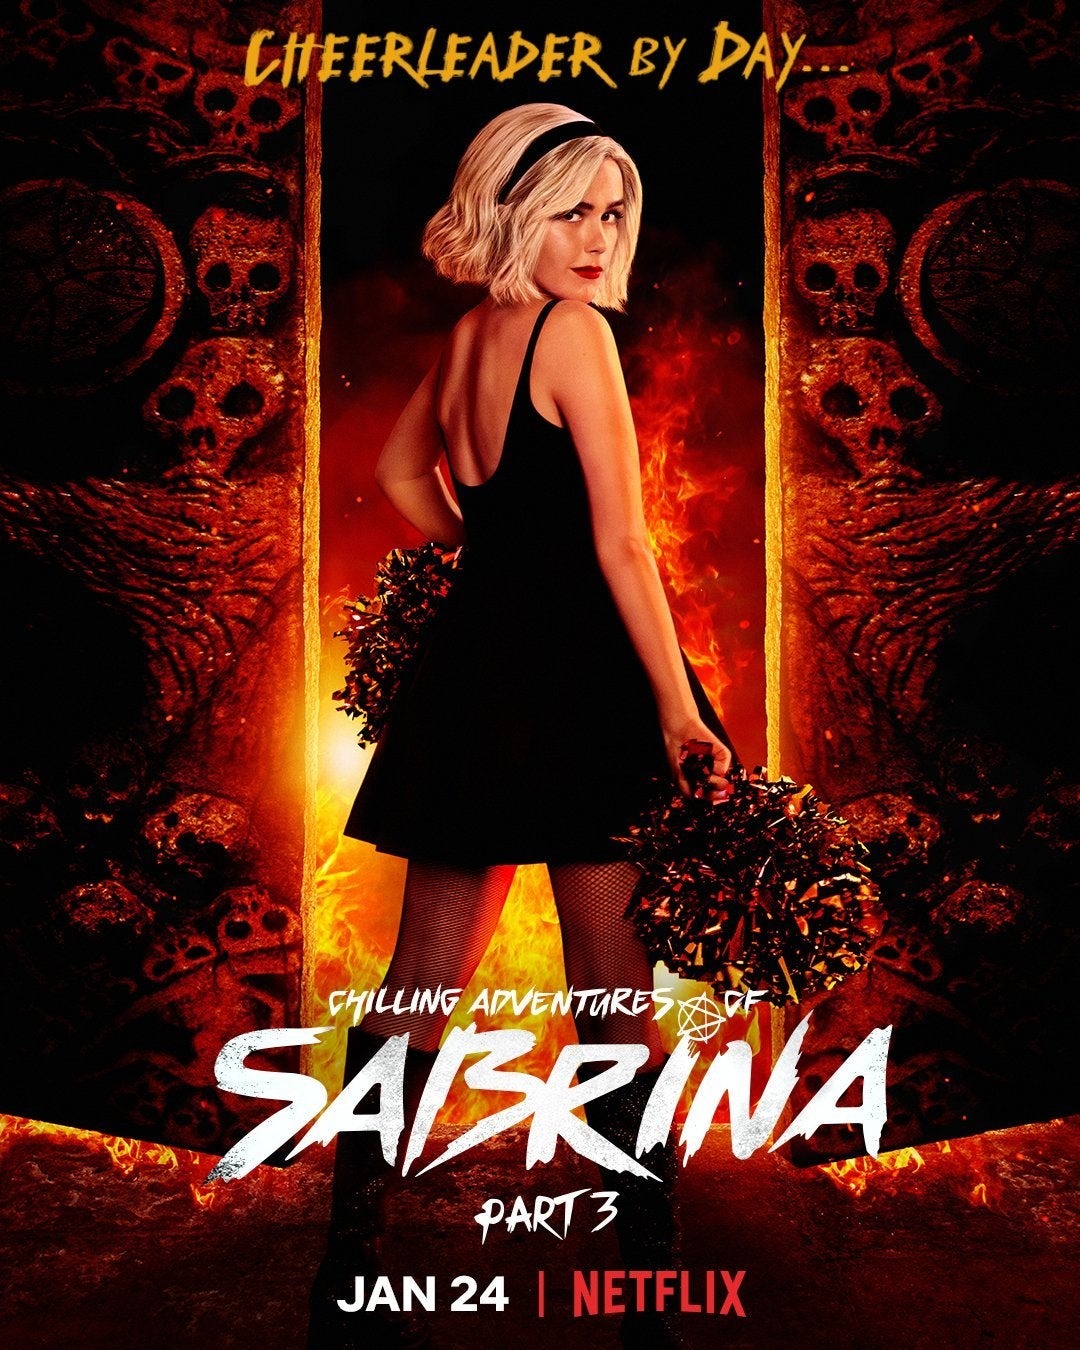 Extra Large TV Poster Image for Chilling Adventures of Sabrina (#5 of 8)